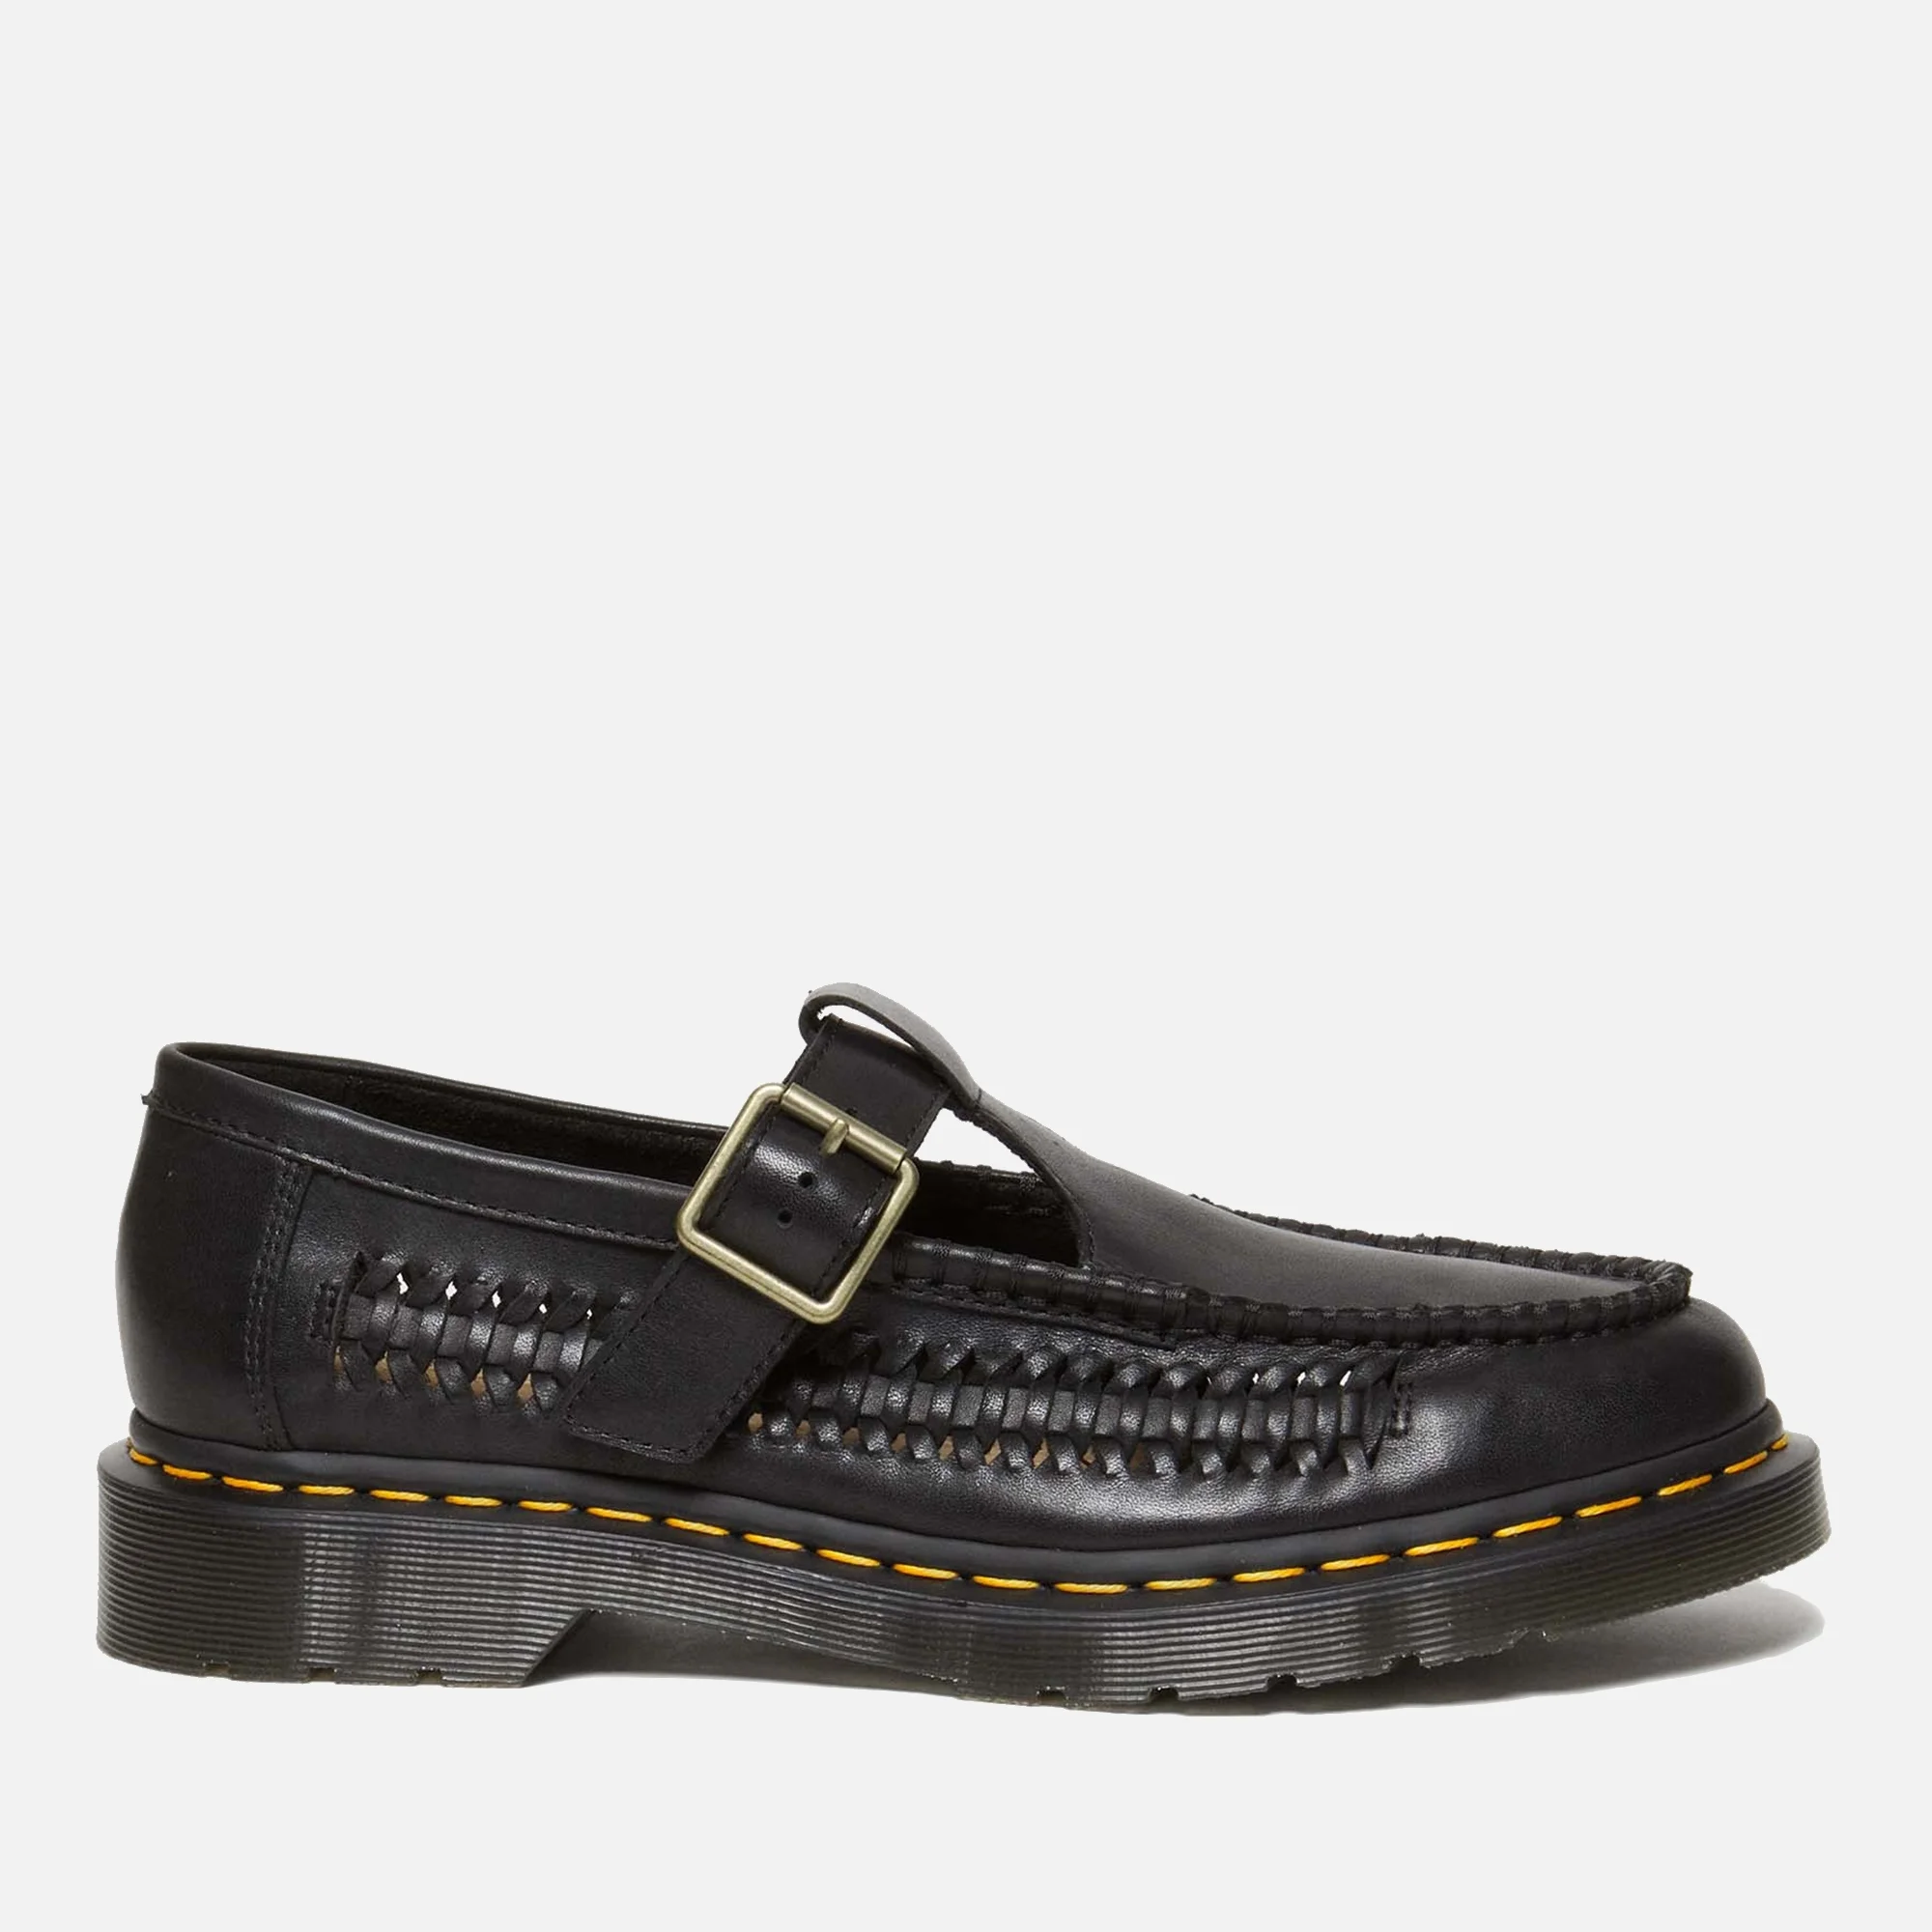 Dr. Martens Adrian Leather T-Bar Shoes Image 1